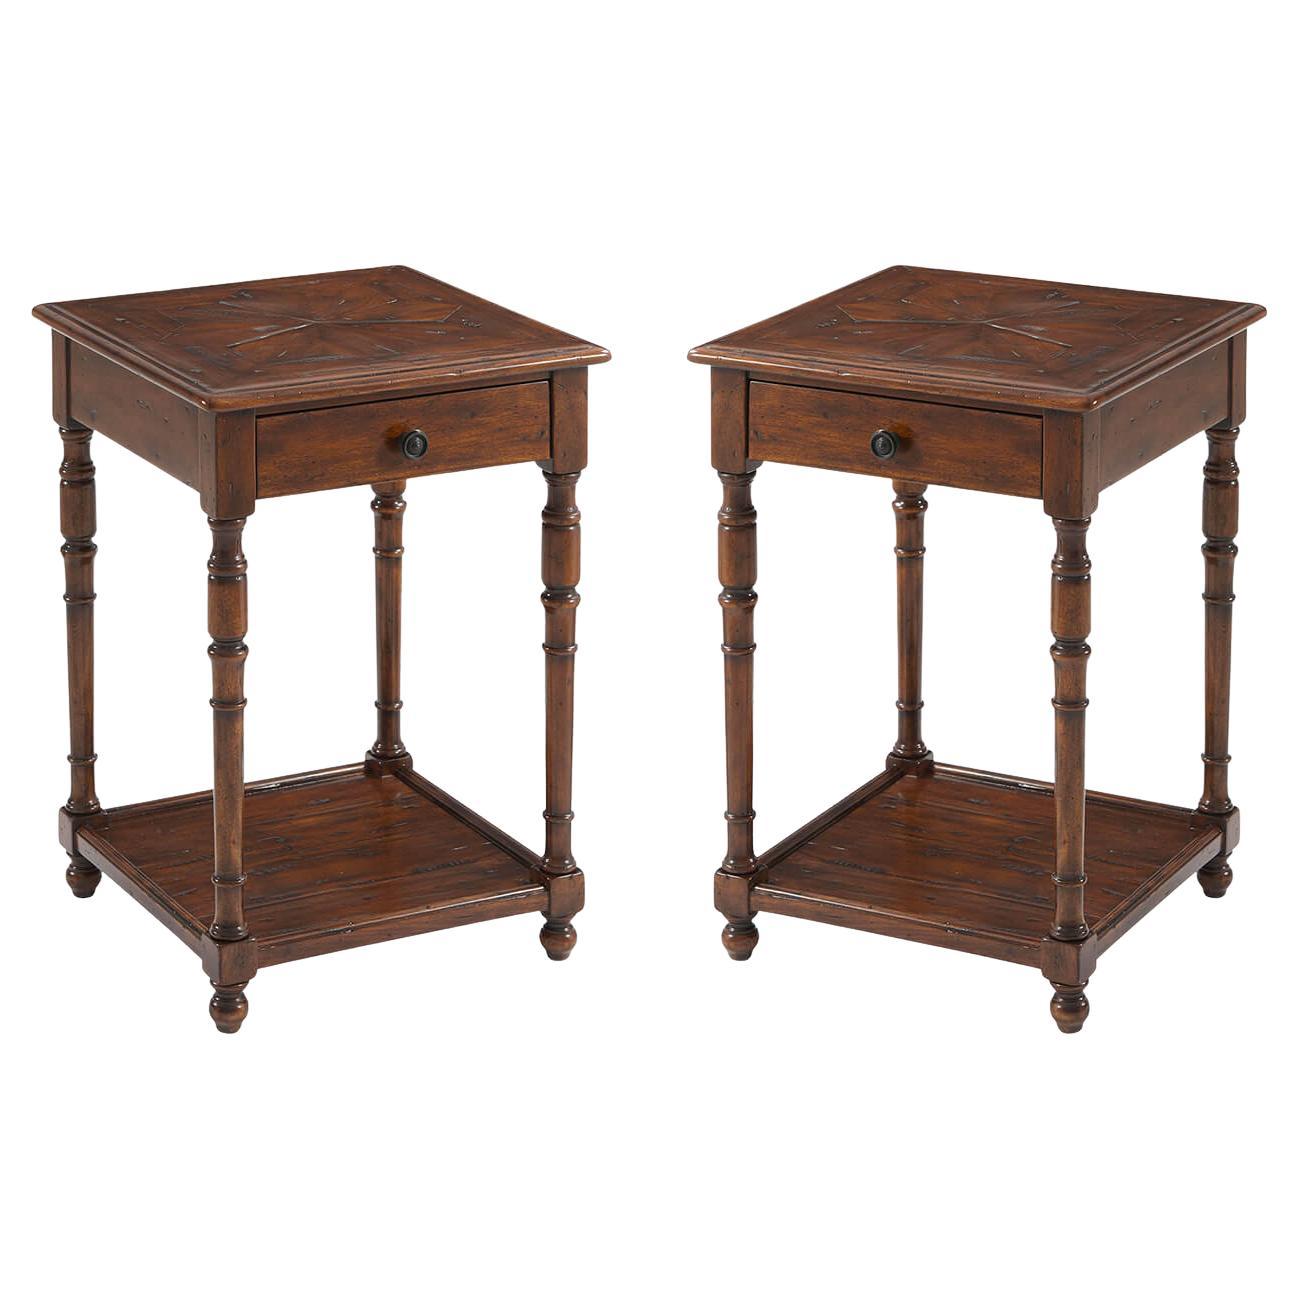 Pair of English Rustic Accent Tables